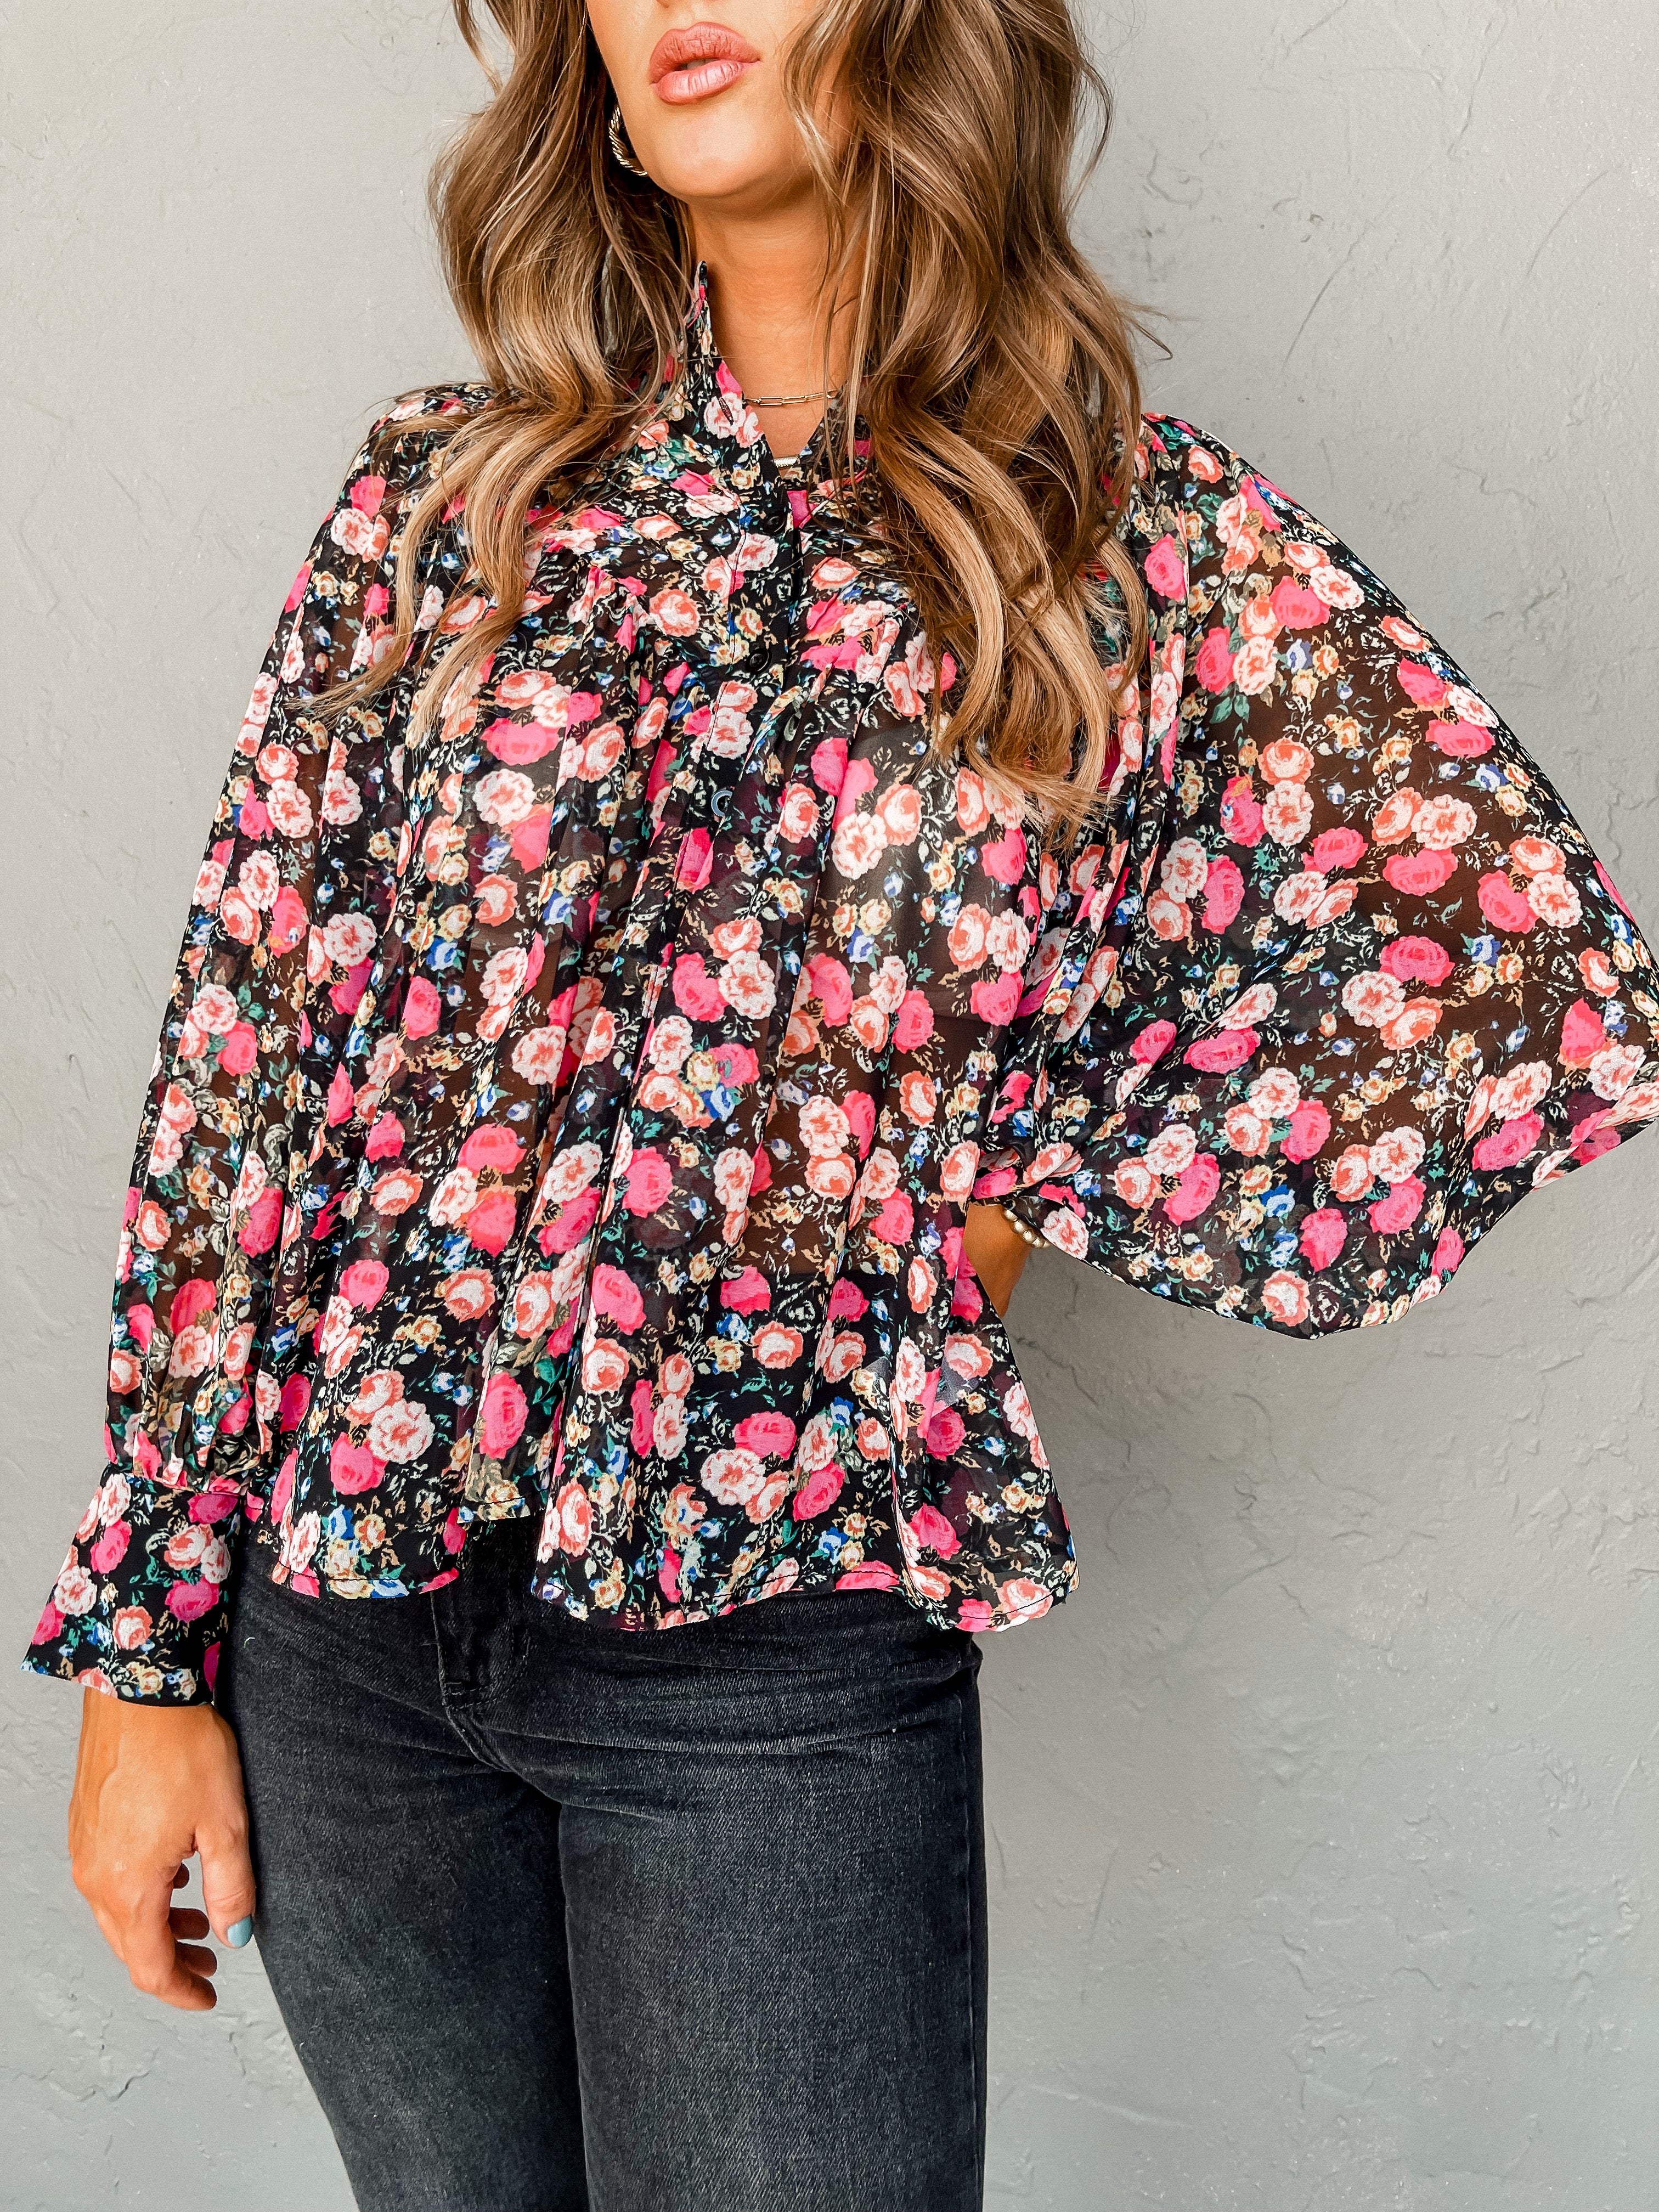 Delightful Charm Floral Sheer Top